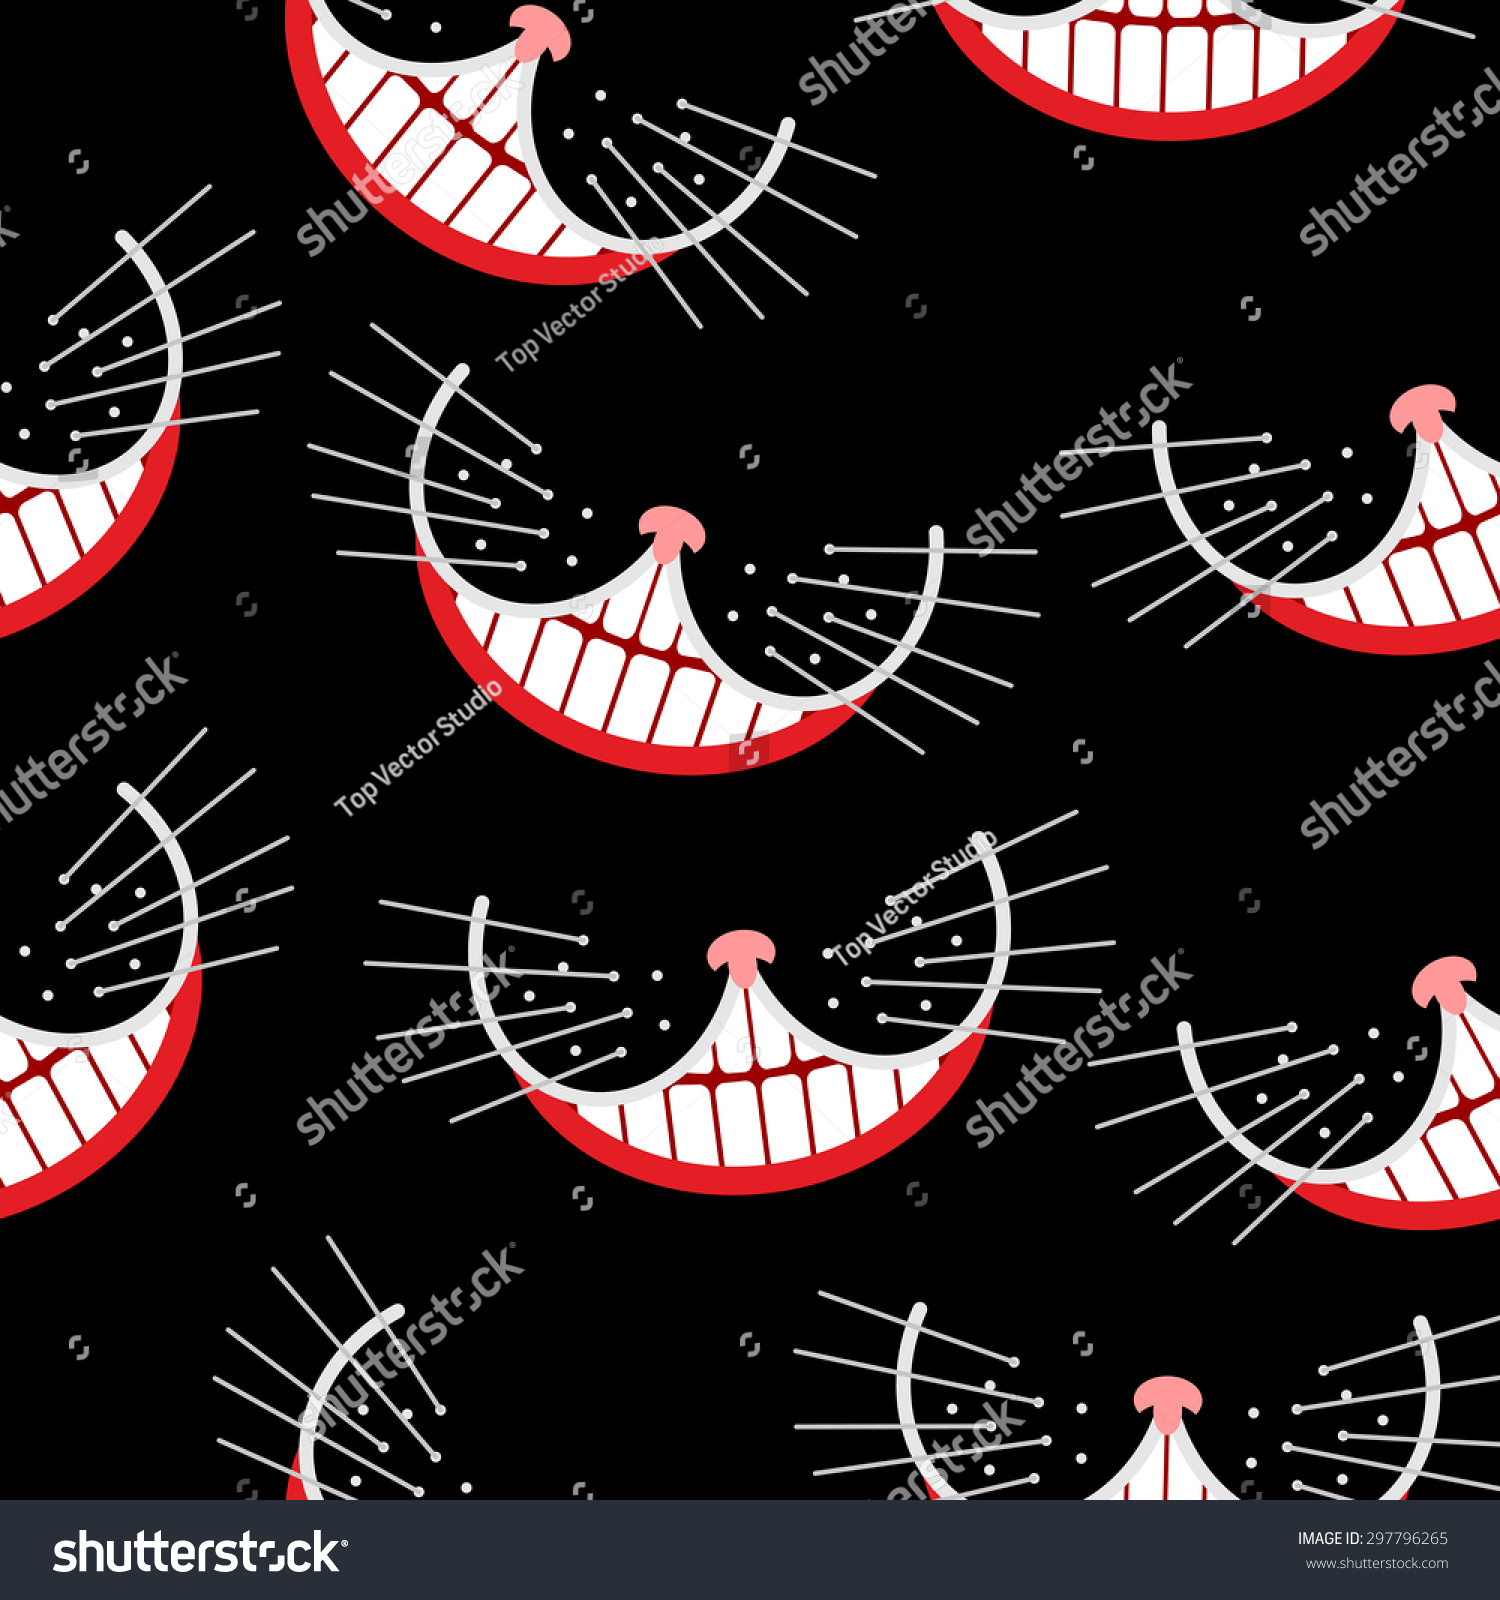 SVG of Cheshire cat Smile  seamless pattern. Vector background. svg